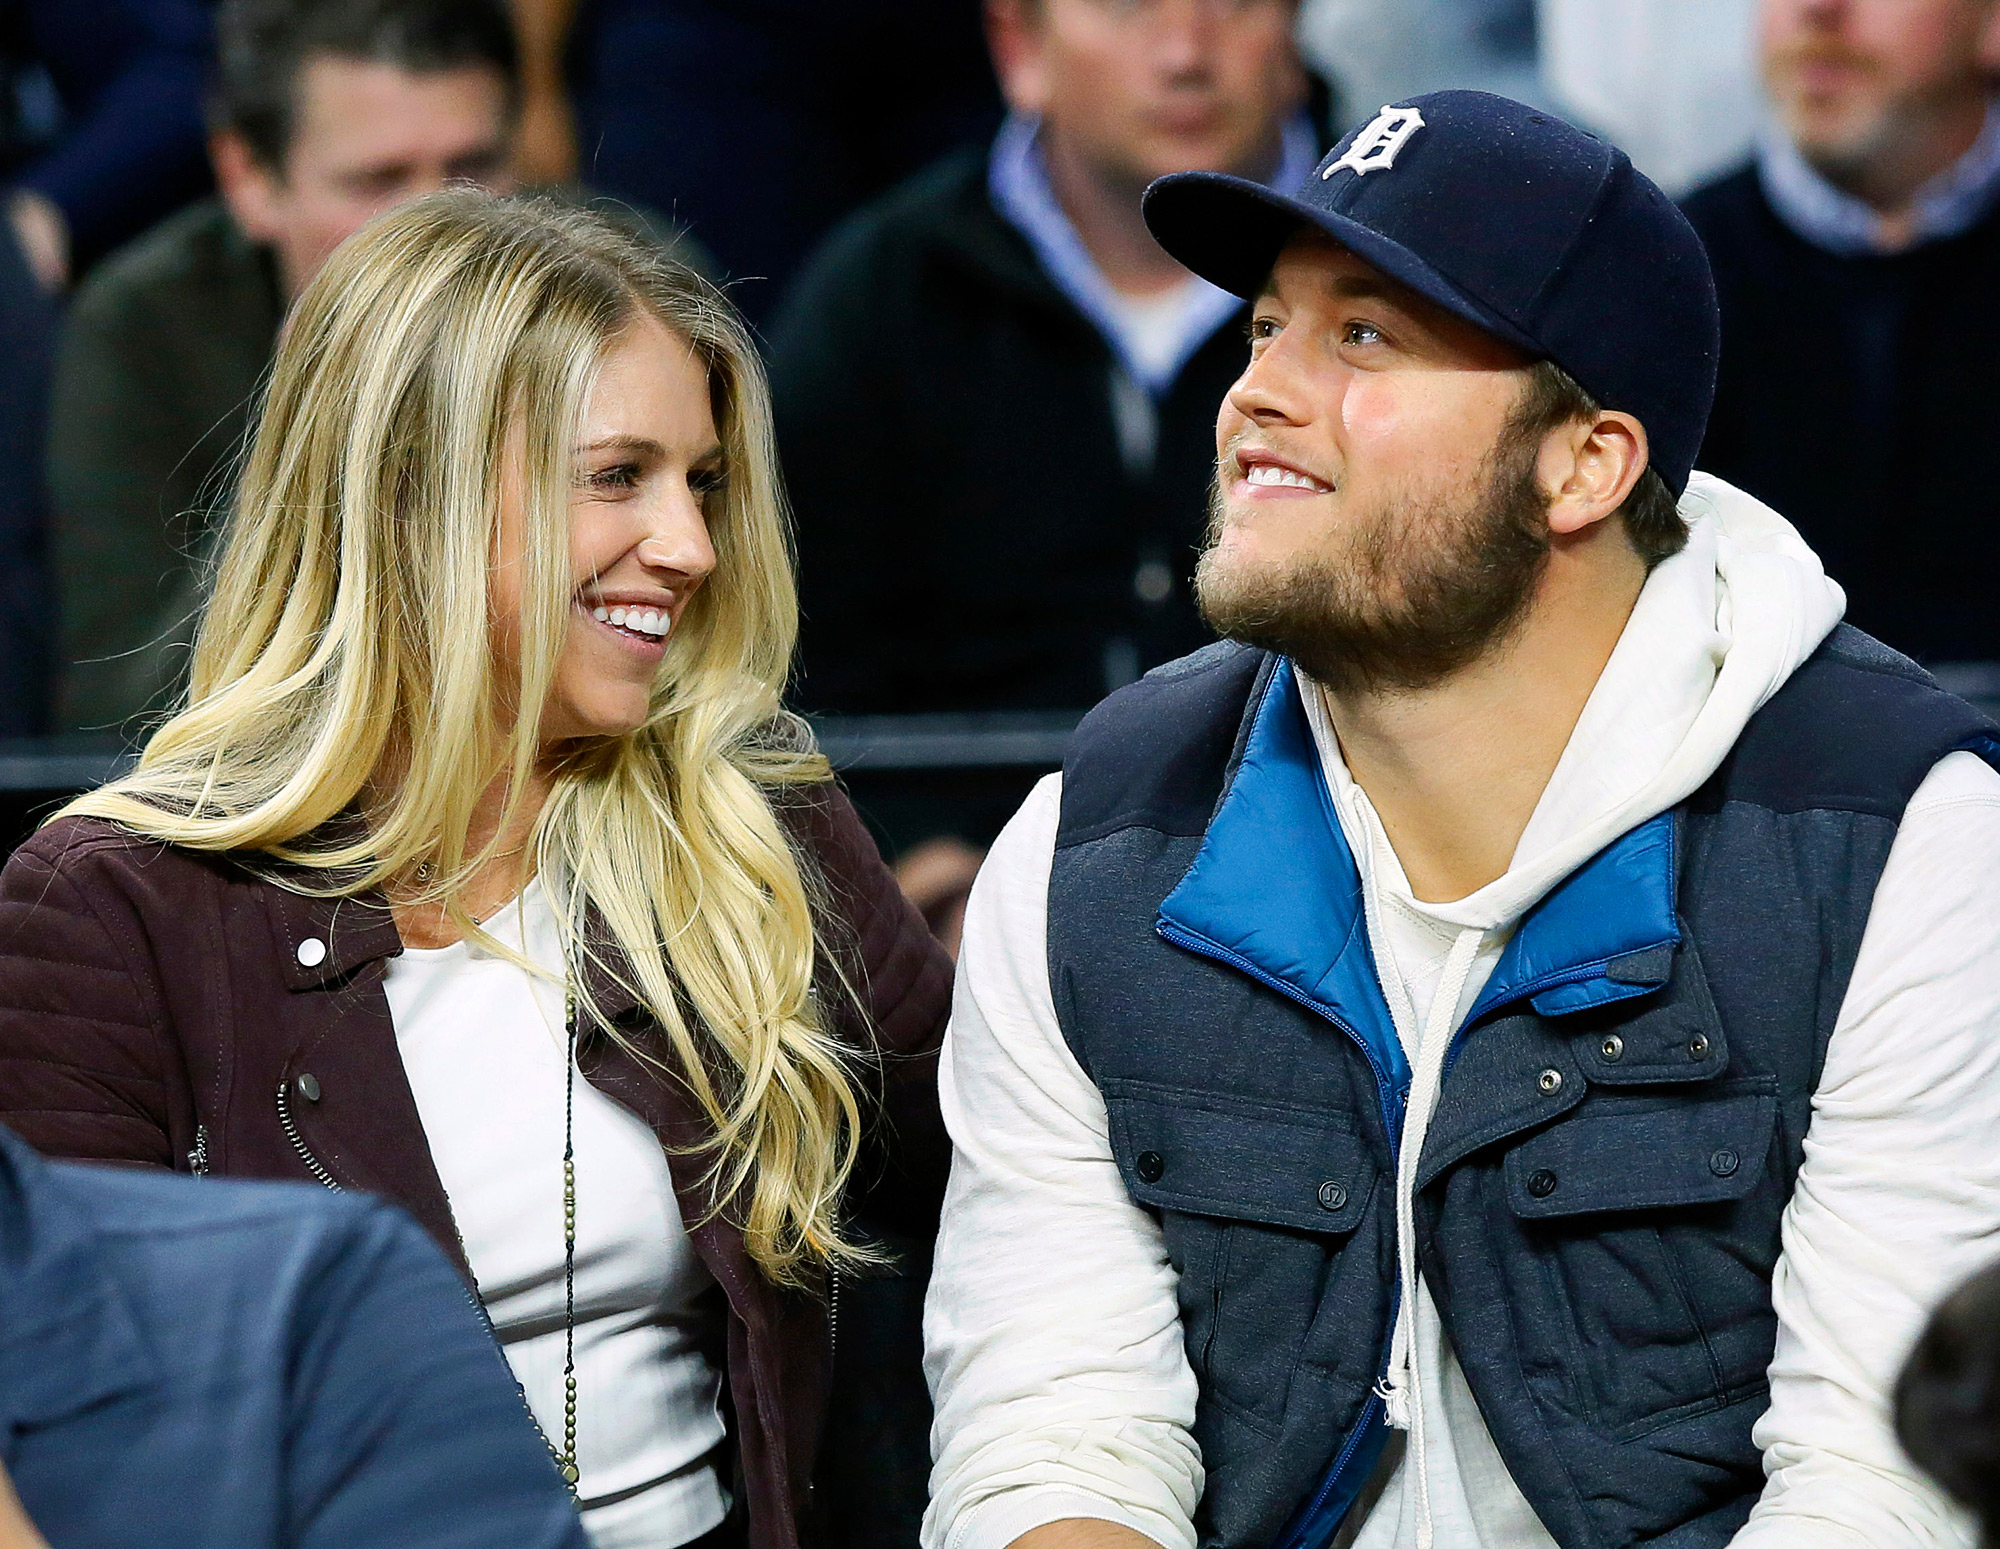 Matthew Stafford discusses balancing wife's health and commitment